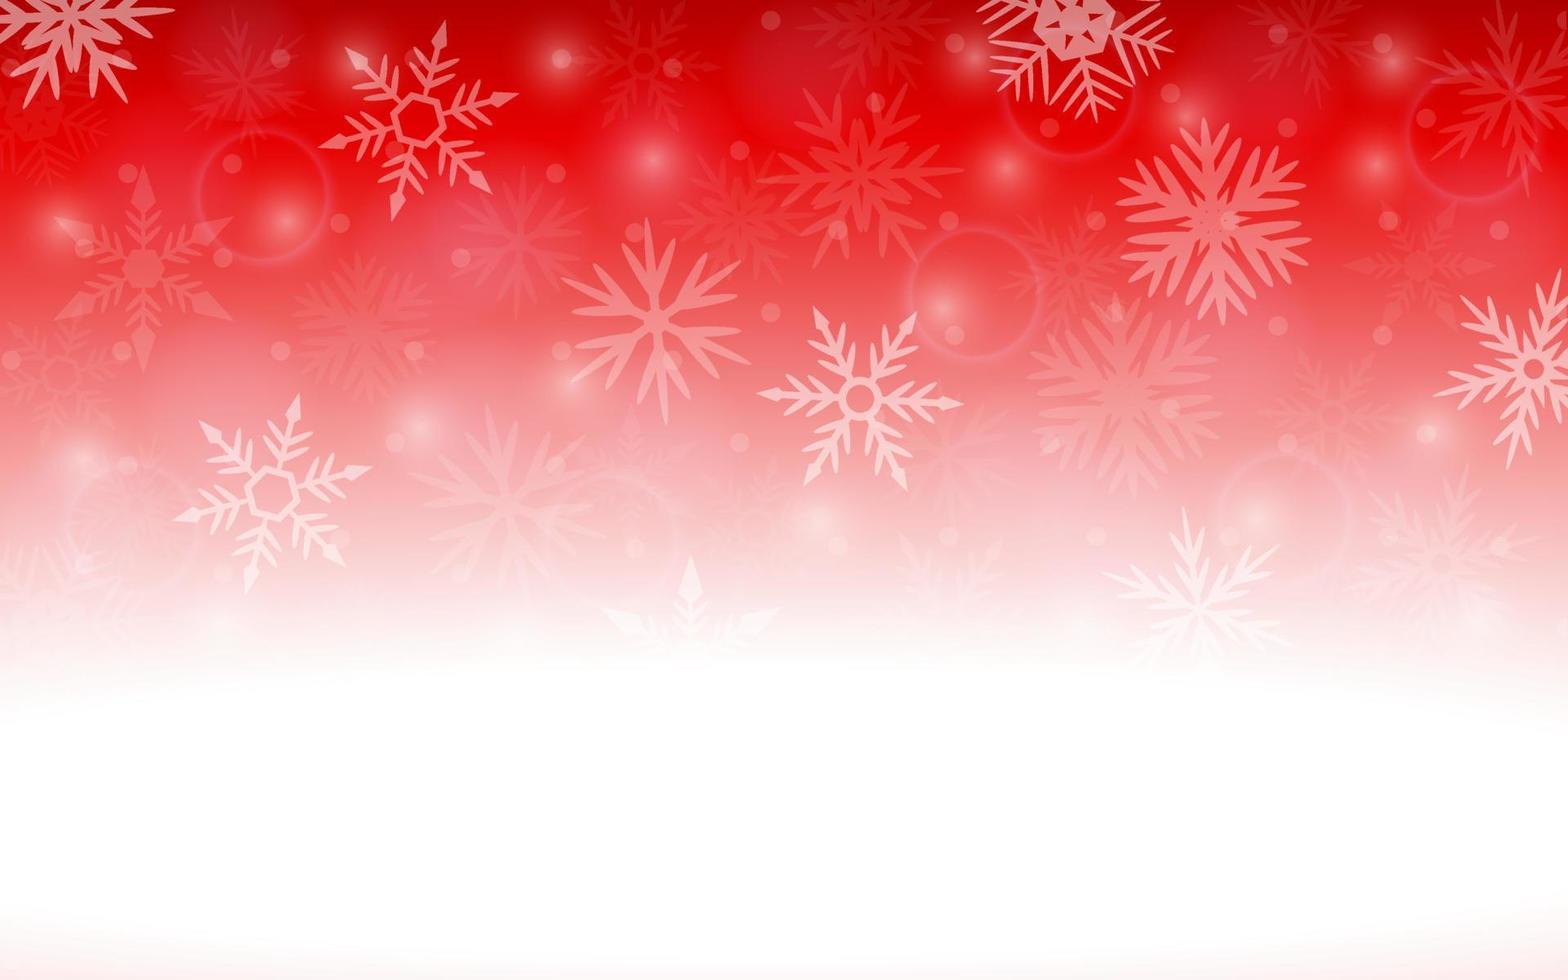 Christmas red background, with snowflakes vector illustration